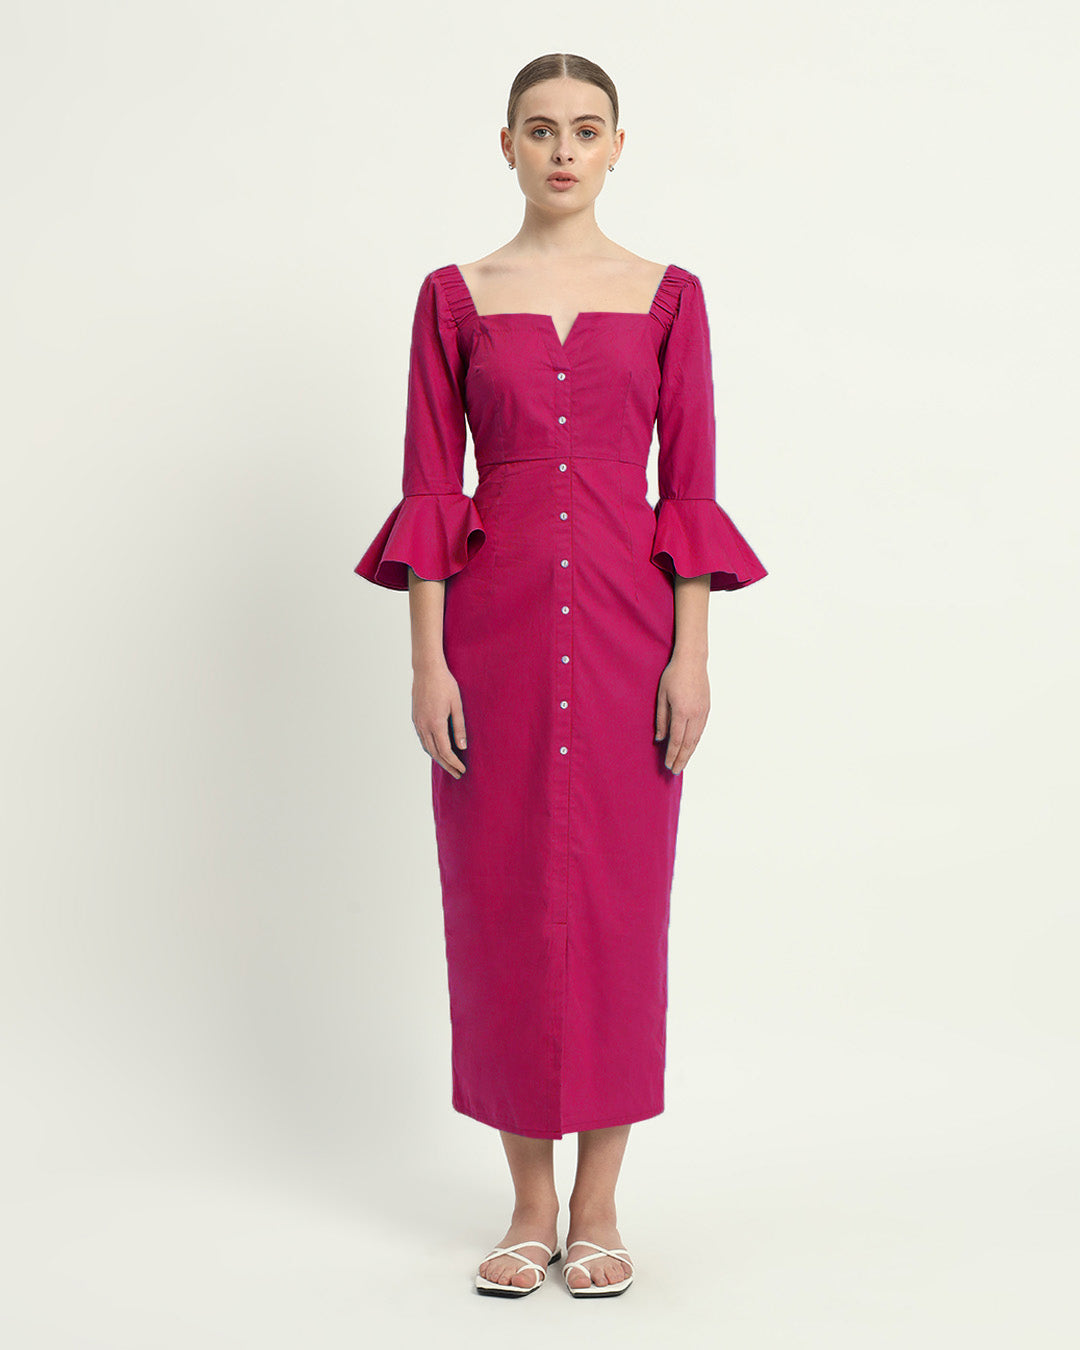 The Rosendale Berry Cotton Dress